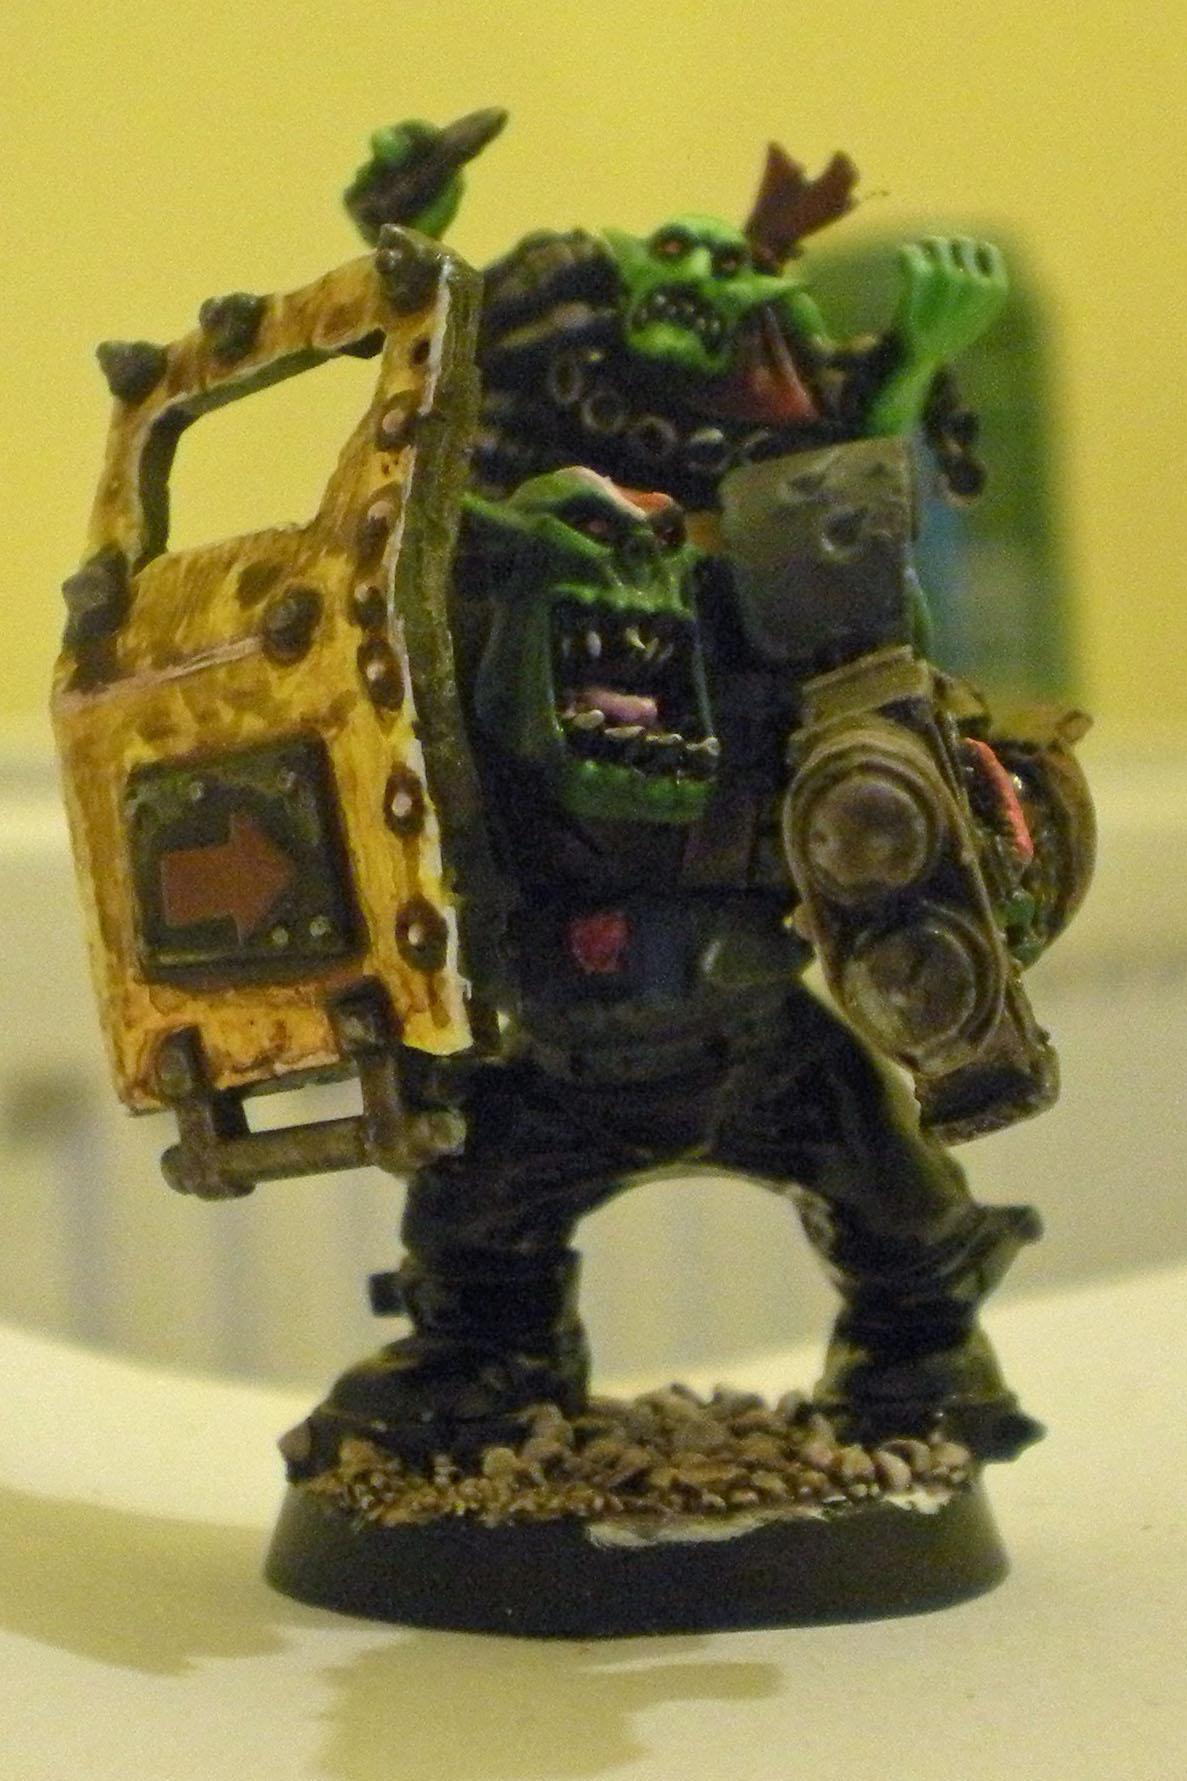 Day 6 - Saturday. Fingaz. Will steal anything that isn't welded down. And even some stuff that is. Weilding a "liberated" Bad Moon Trukk fairing, and wearing Black Legion shoulder pads as elbow pads. Second new Nob, really like this kit!